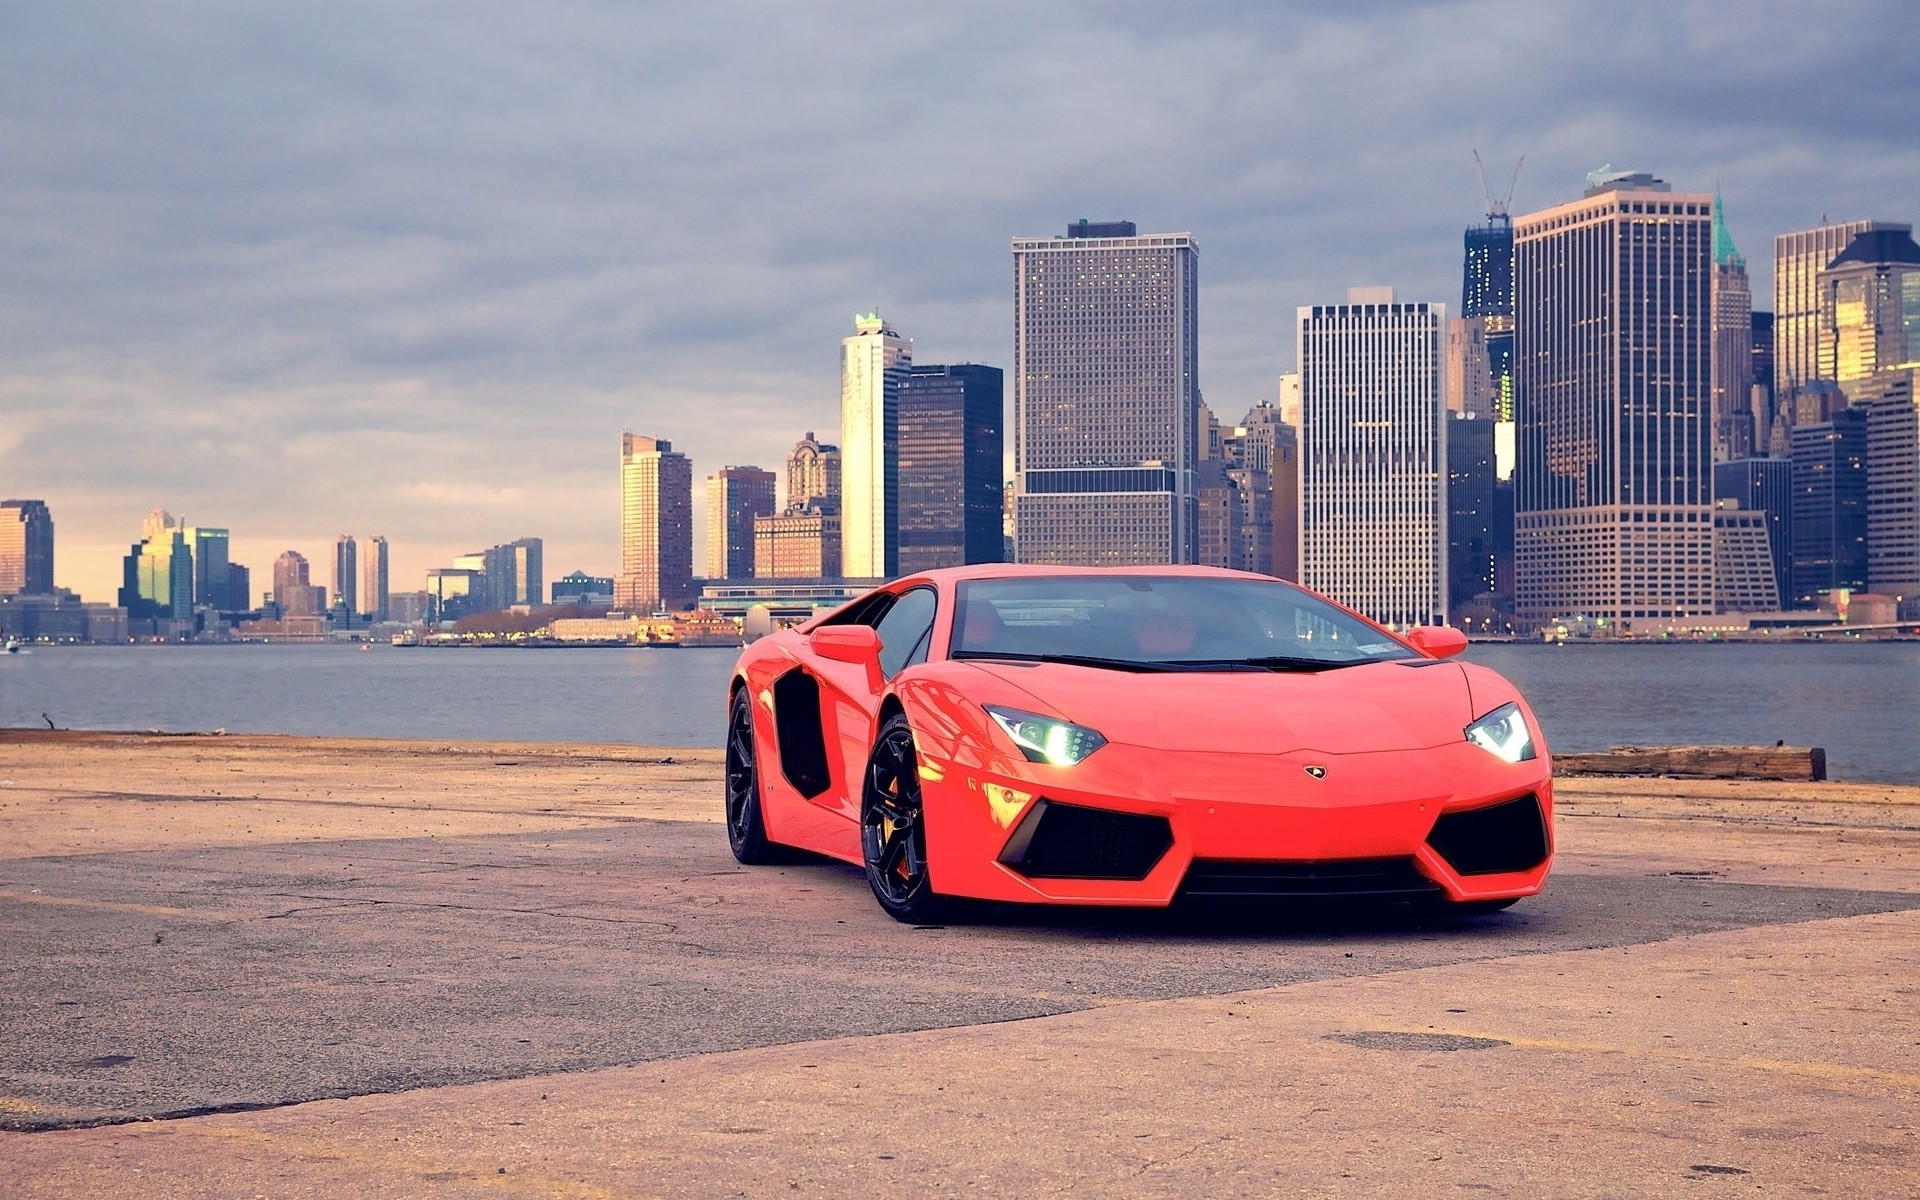 1920x1200 Title : high definition car wallpapers. Dimension : 1920 x 1200. File Type  : JPG/JPEG